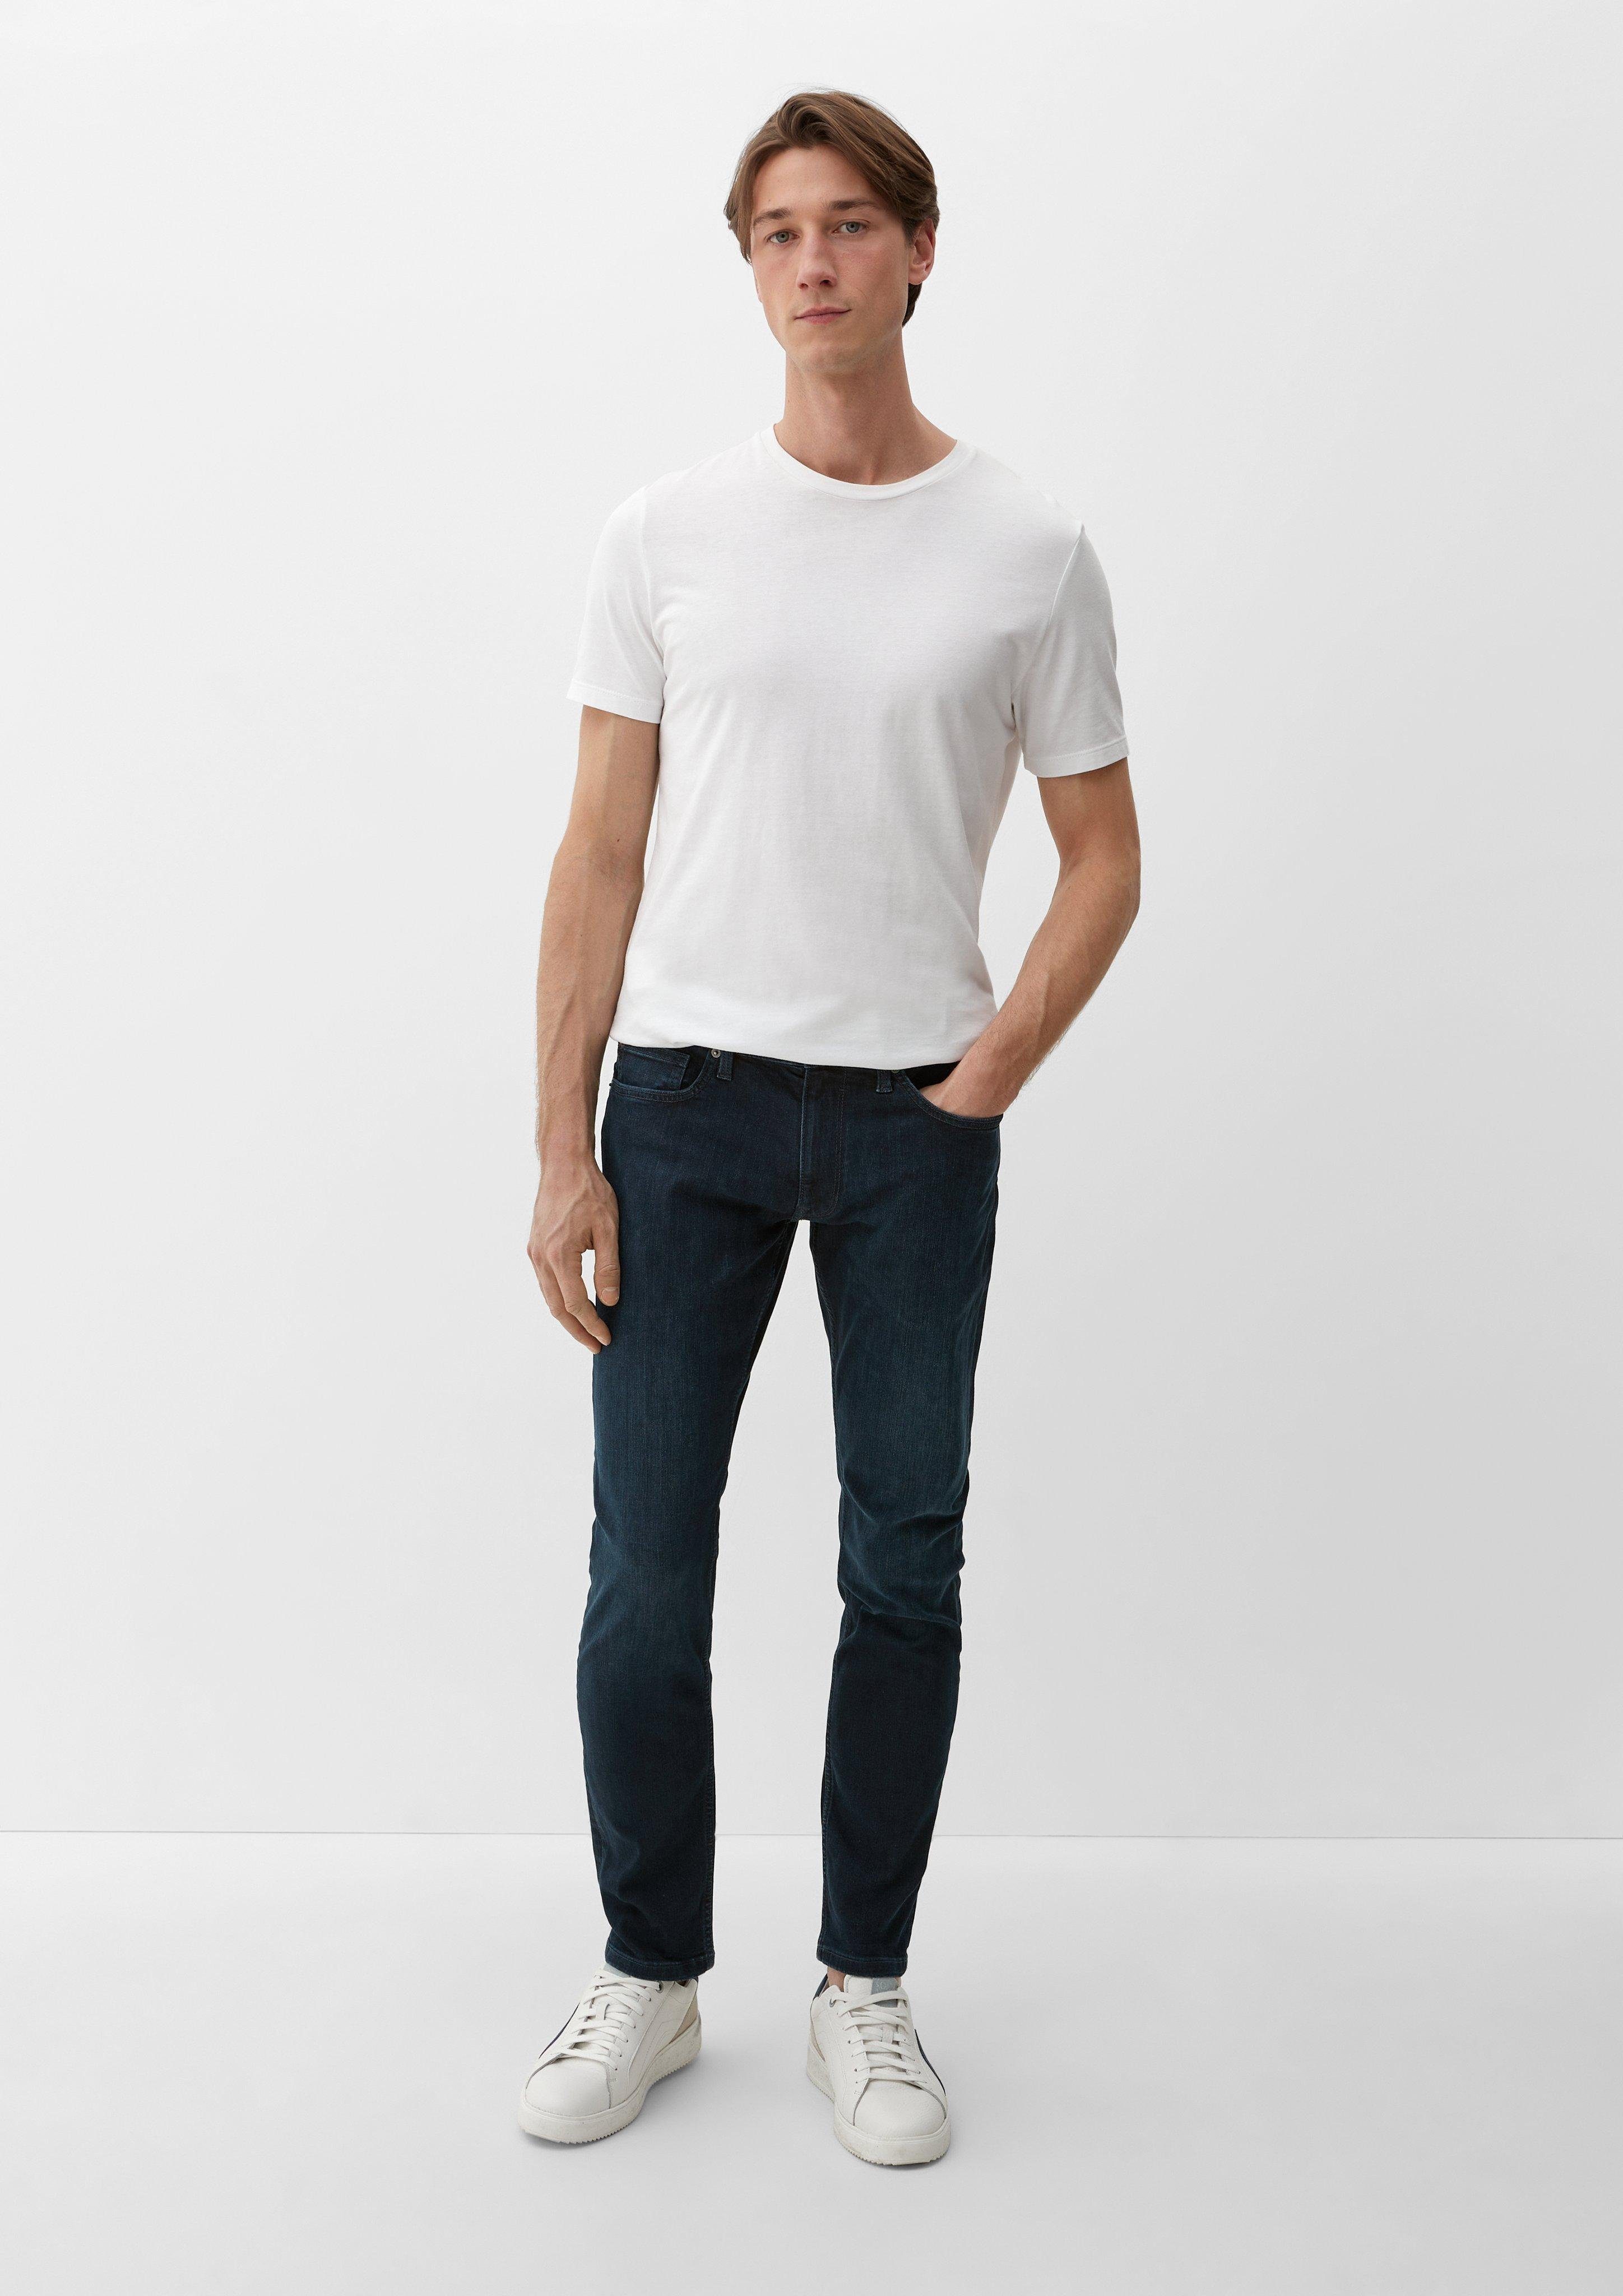 blau Slim Fit / / Mid Jeans Slim: s.Oliver Rise Leg Keith Stoffhose / Waschung